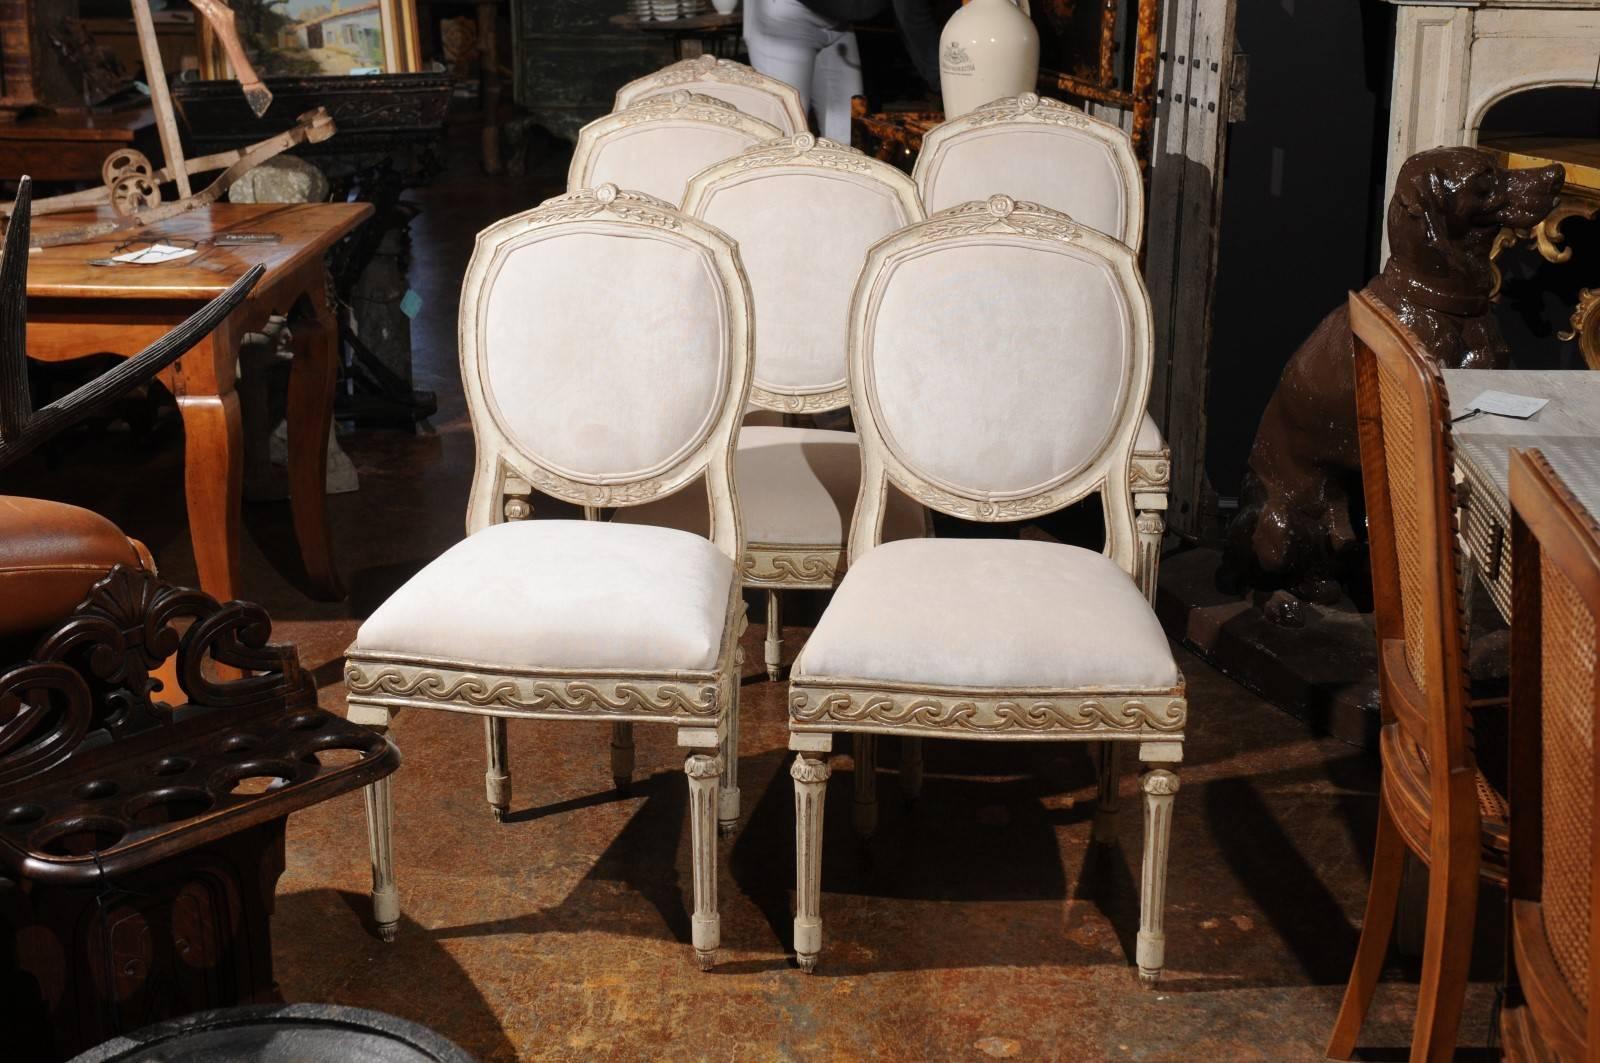 Set of Six French Neoclassical Silver Gilt Dining Chairs with Vitruvian Scroll In Good Condition For Sale In Atlanta, GA